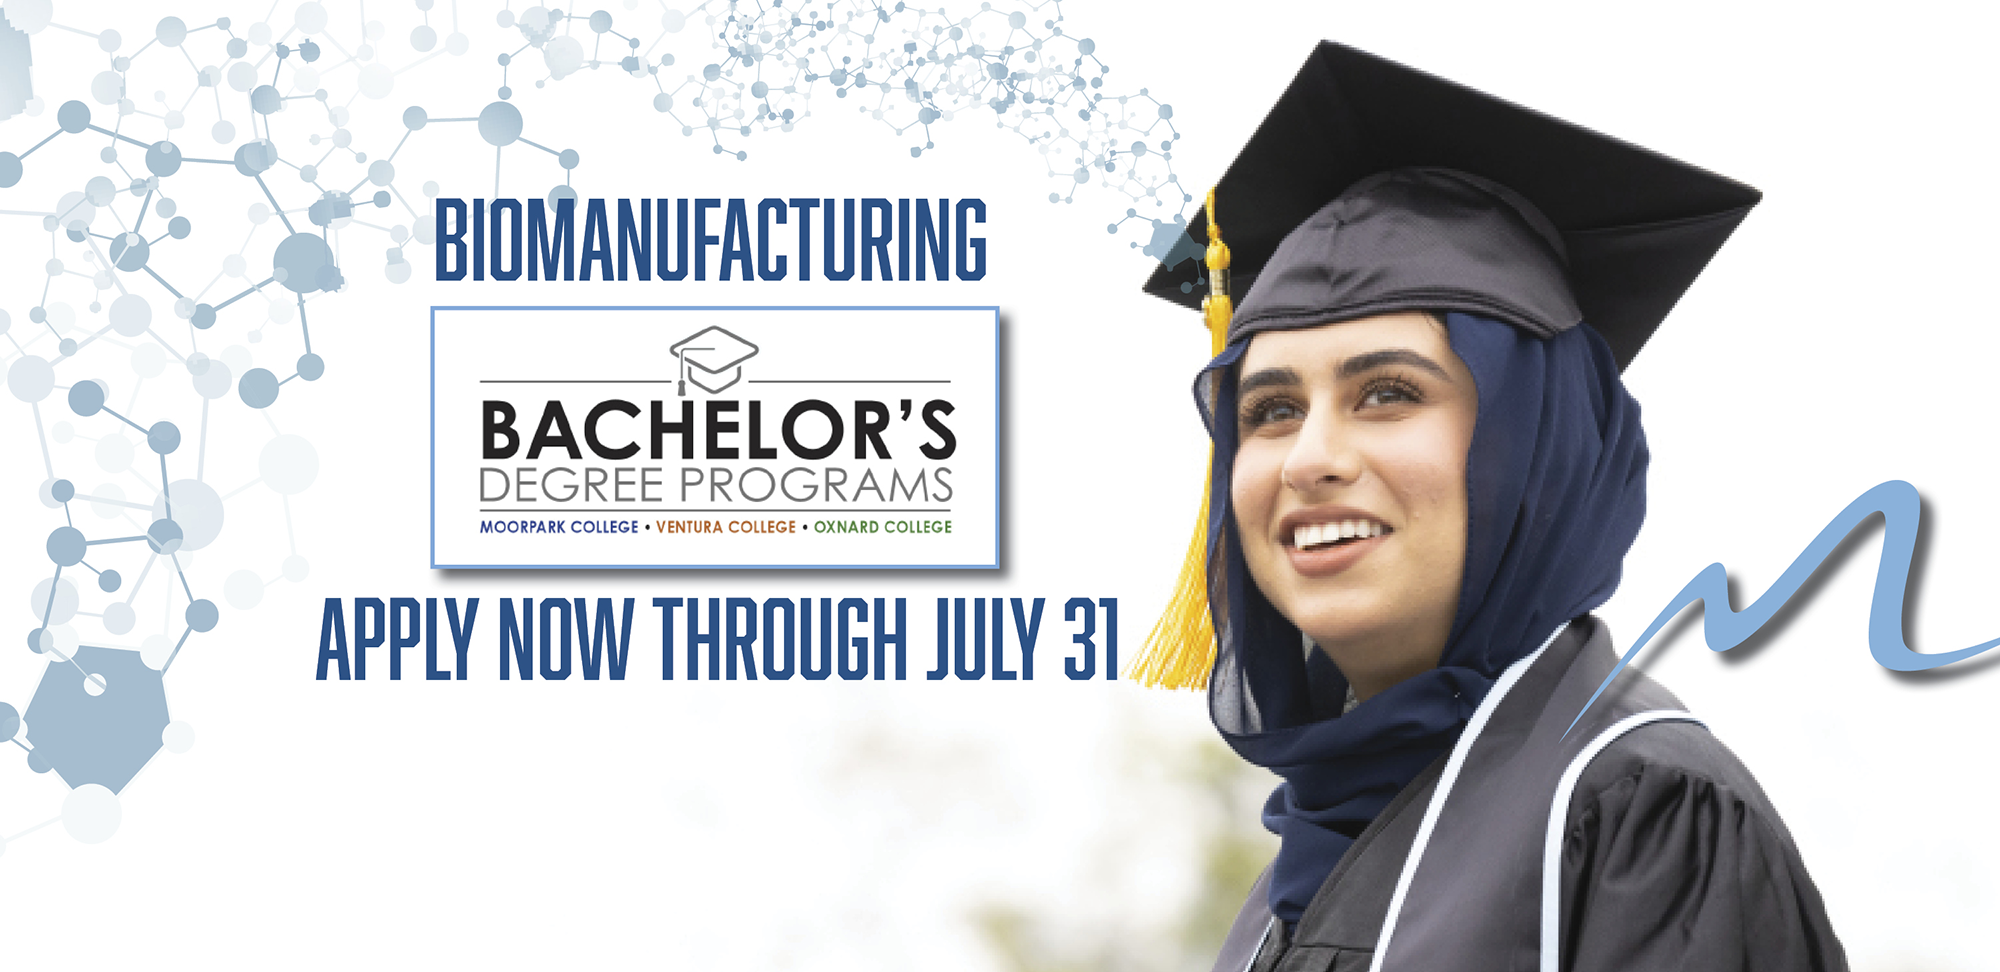 Bachelor's Degree Program: Biomanufacturing. Apply now through July 31.